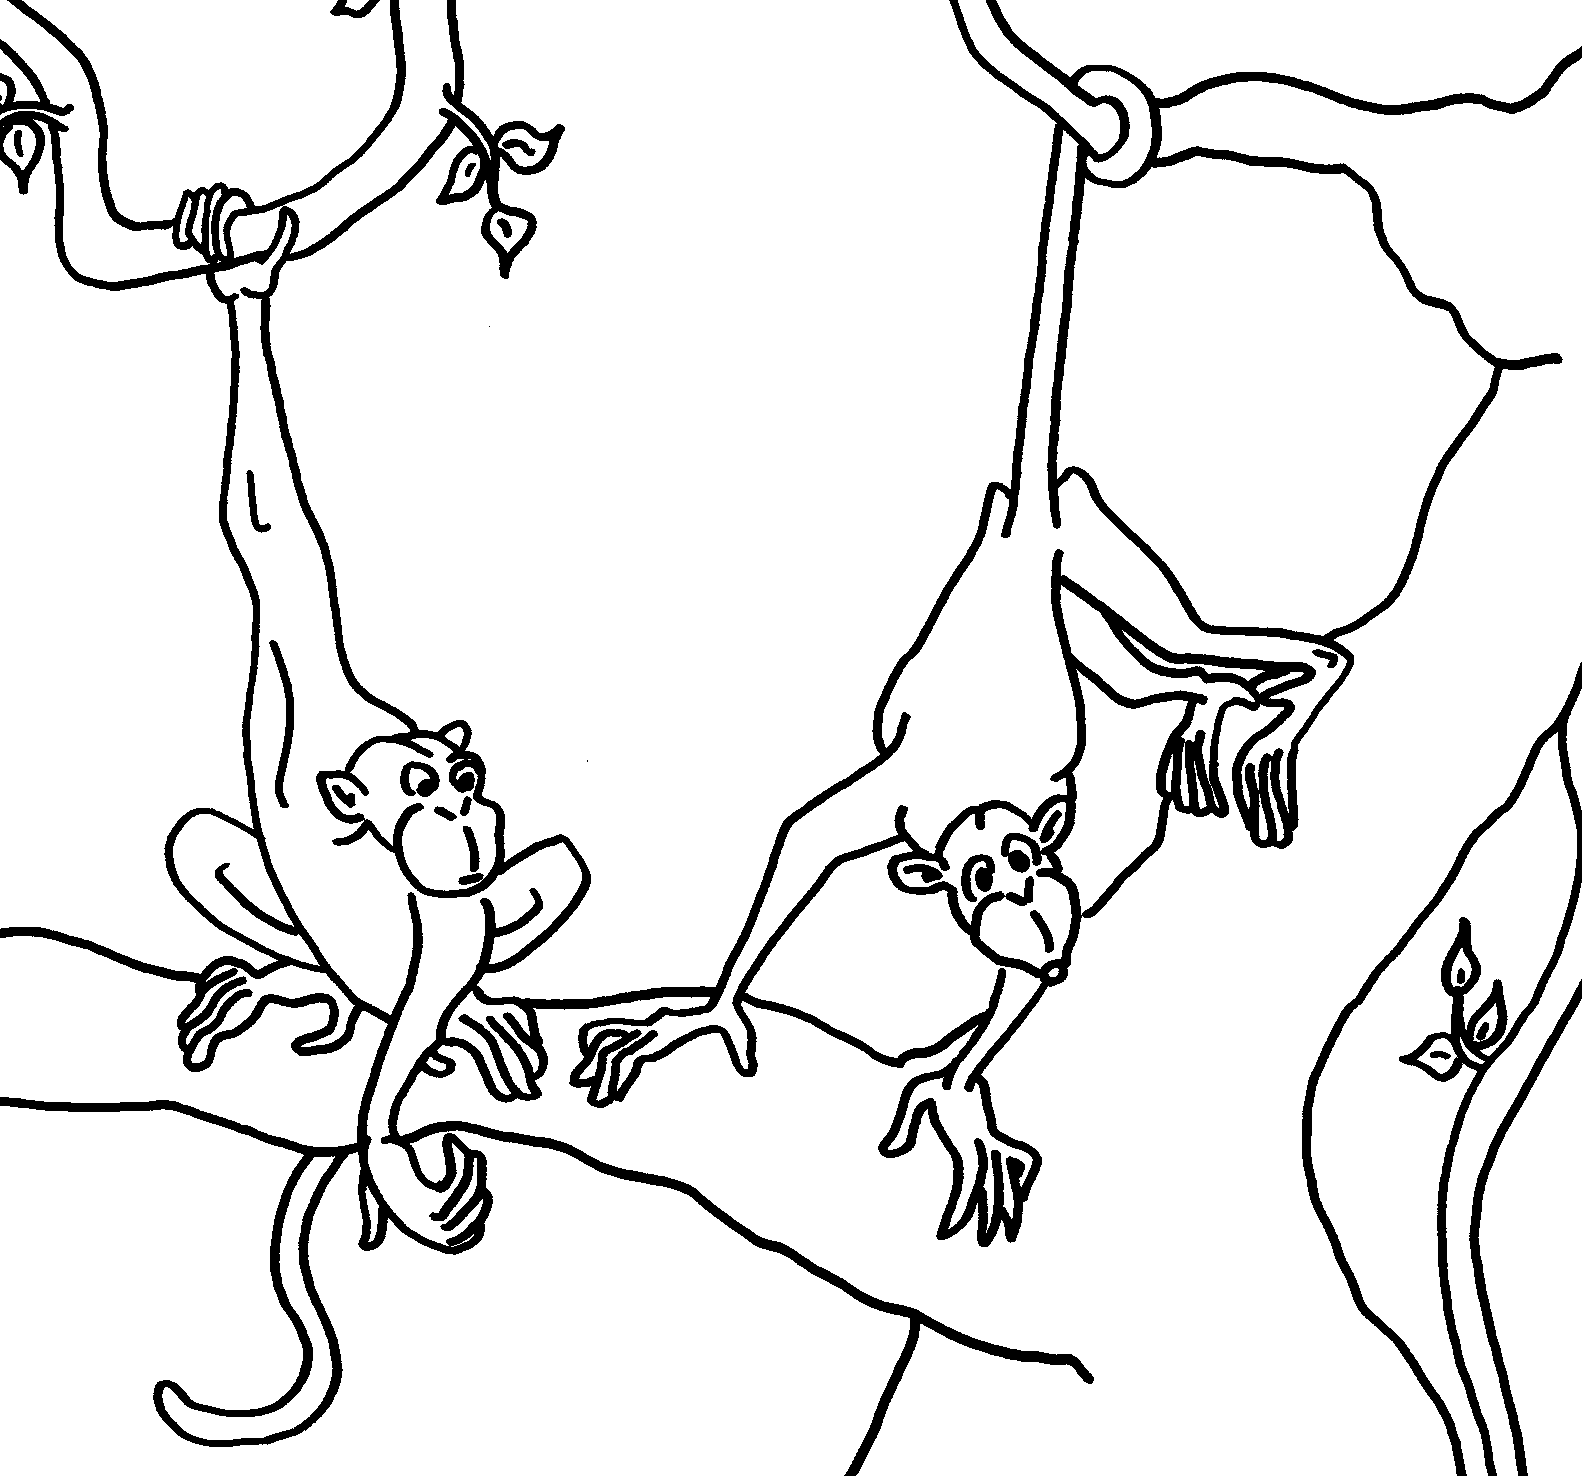 Monkey Colouring Pictures 1